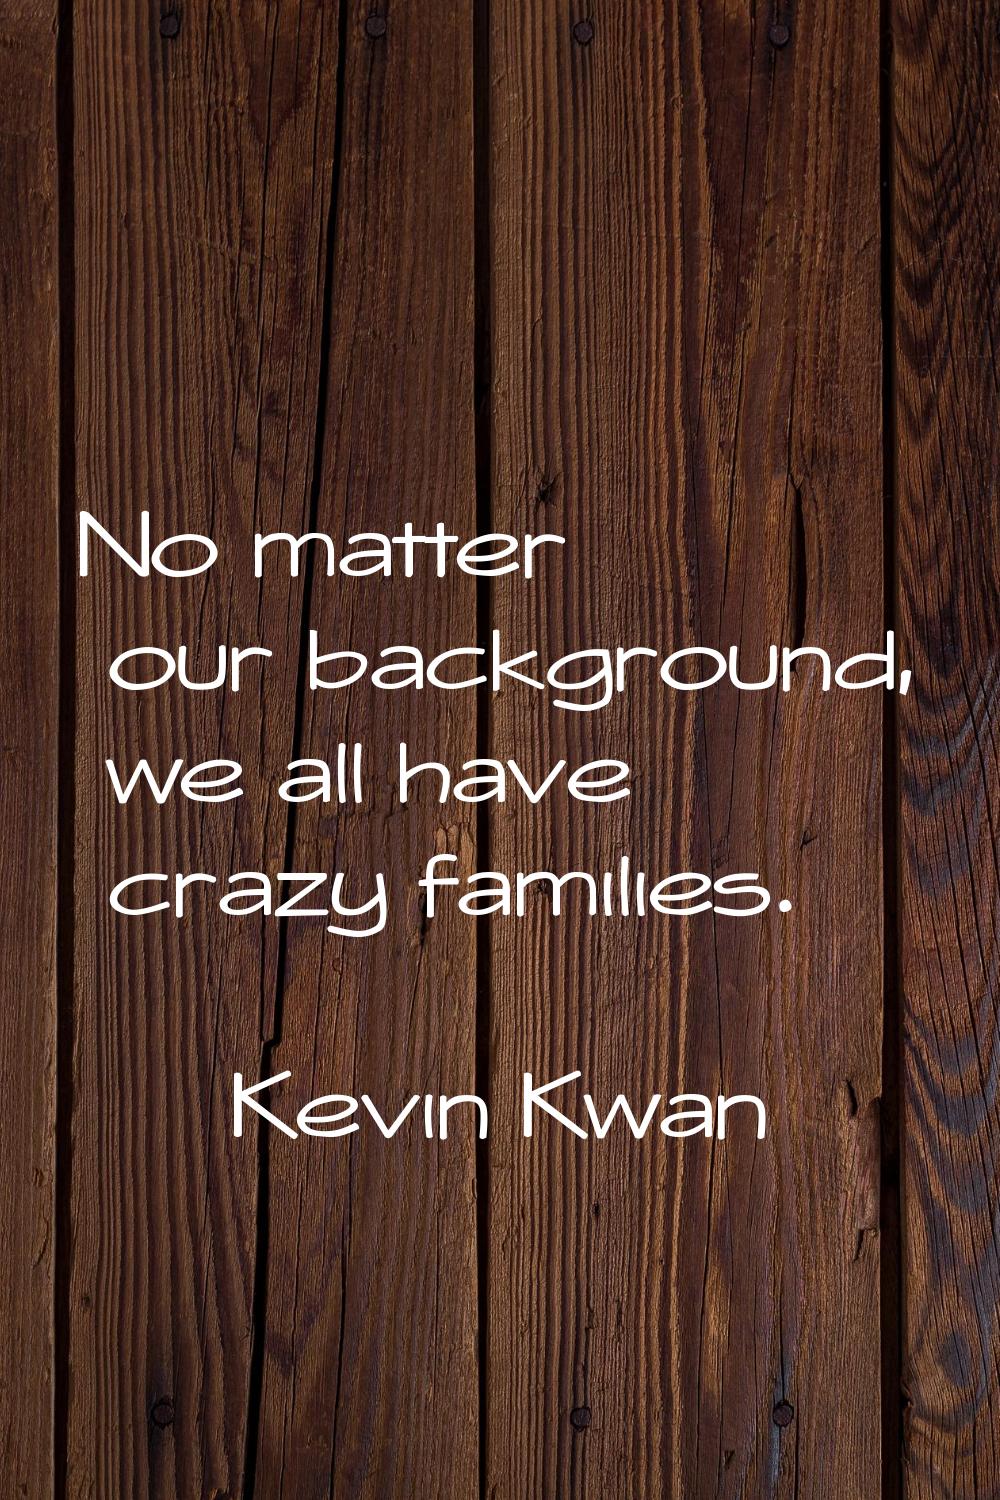 No matter our background, we all have crazy families.